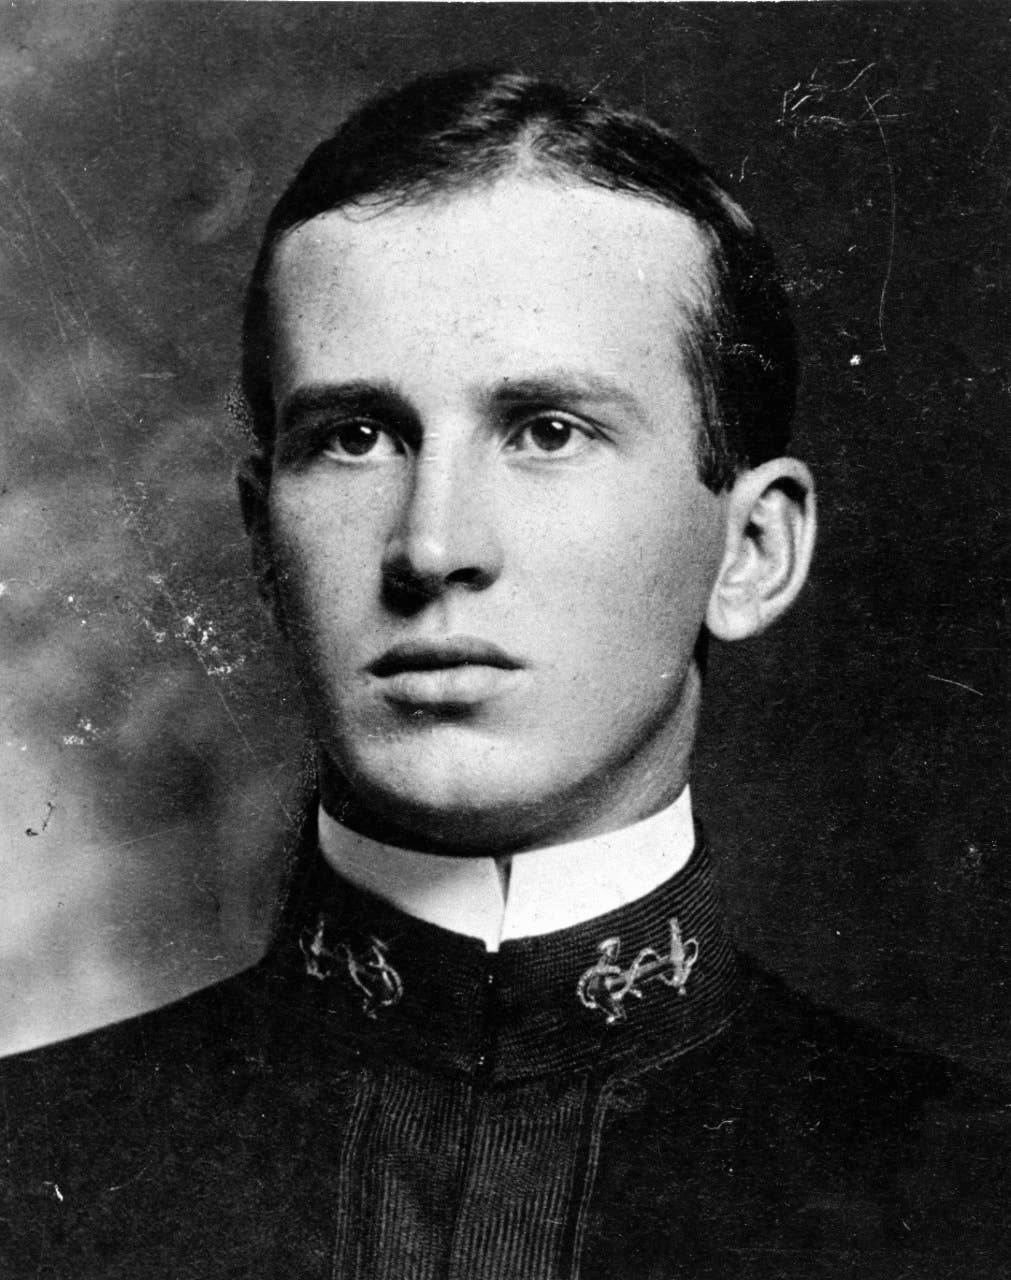 Naval cadet Ernest J. King, a future fleet admiral. (U.S. Naval History and Heritage Command Photograph)